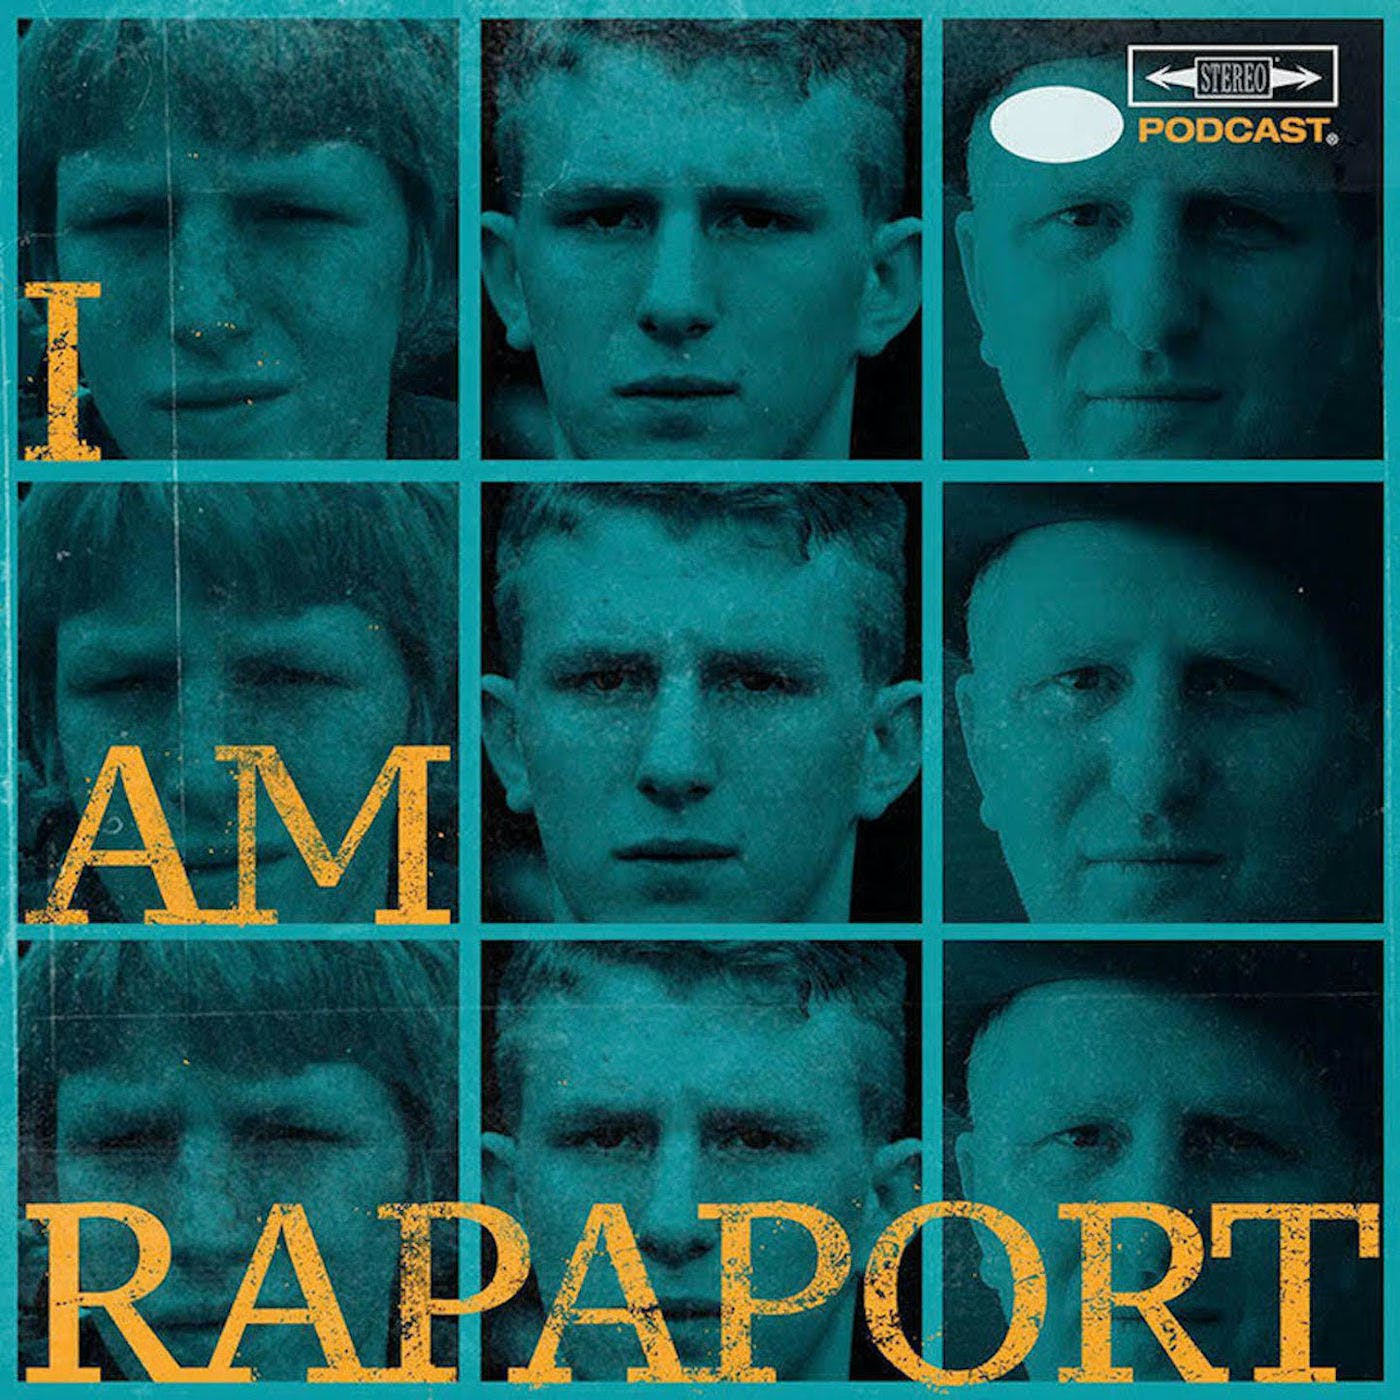 EP 297 - SOLD OUT IN VANCOUVER, BRITISH COLUMBIA w/ MICHAEL RAPAPORT & GERALD MOODY